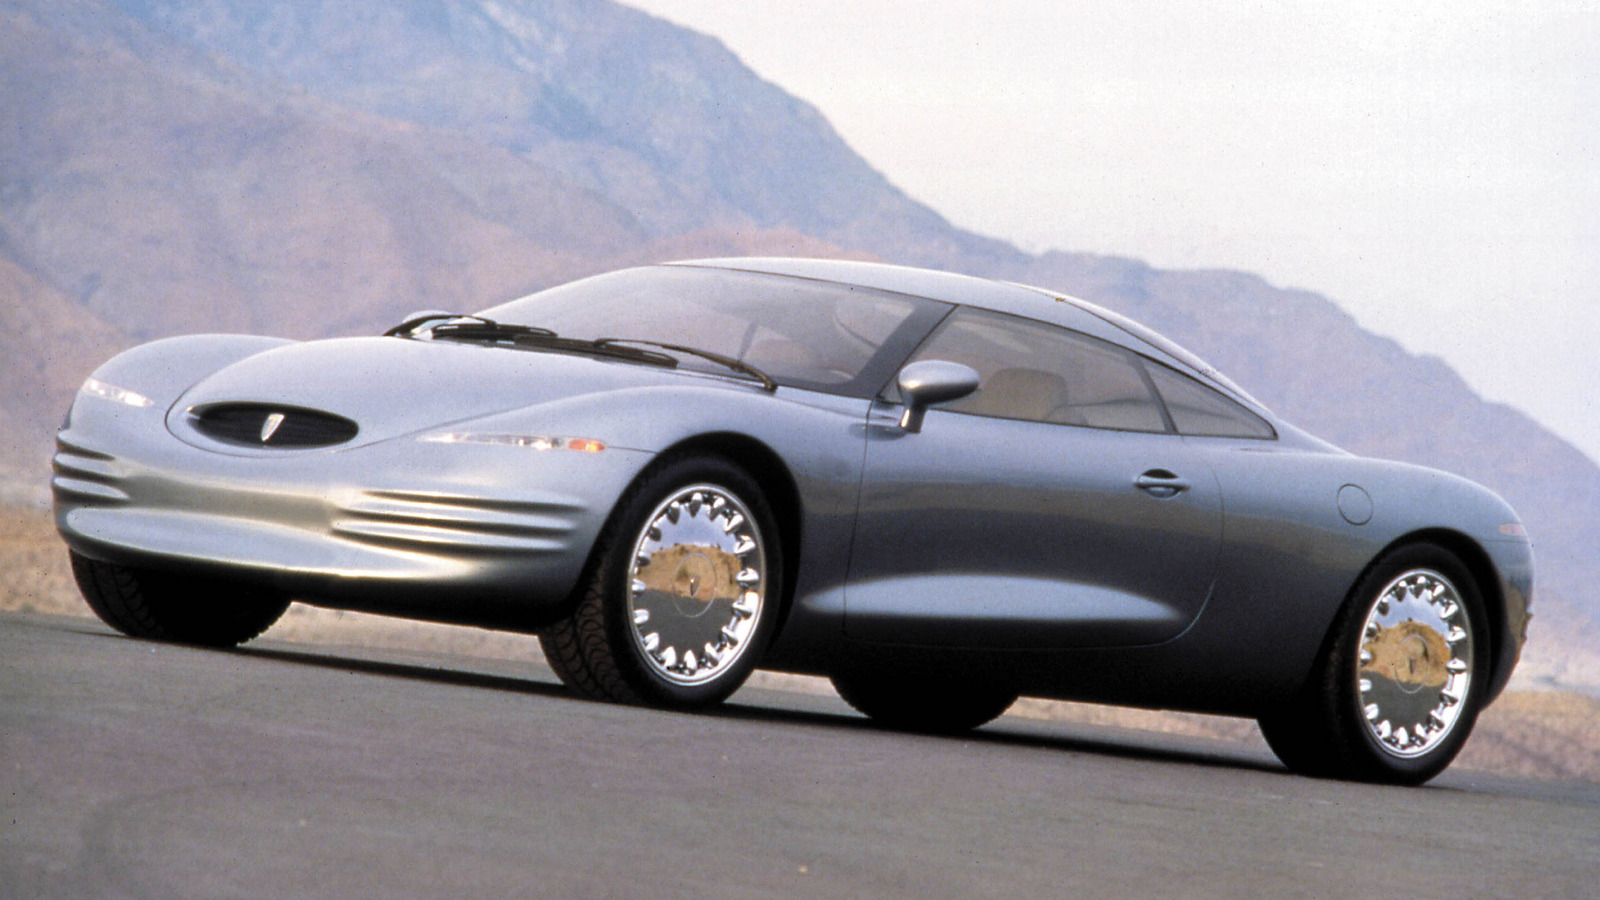 The Chrysler Thunderbolt Concept Featured A Navigation And Infotainment System Ahead Of Its Time – SlashGear